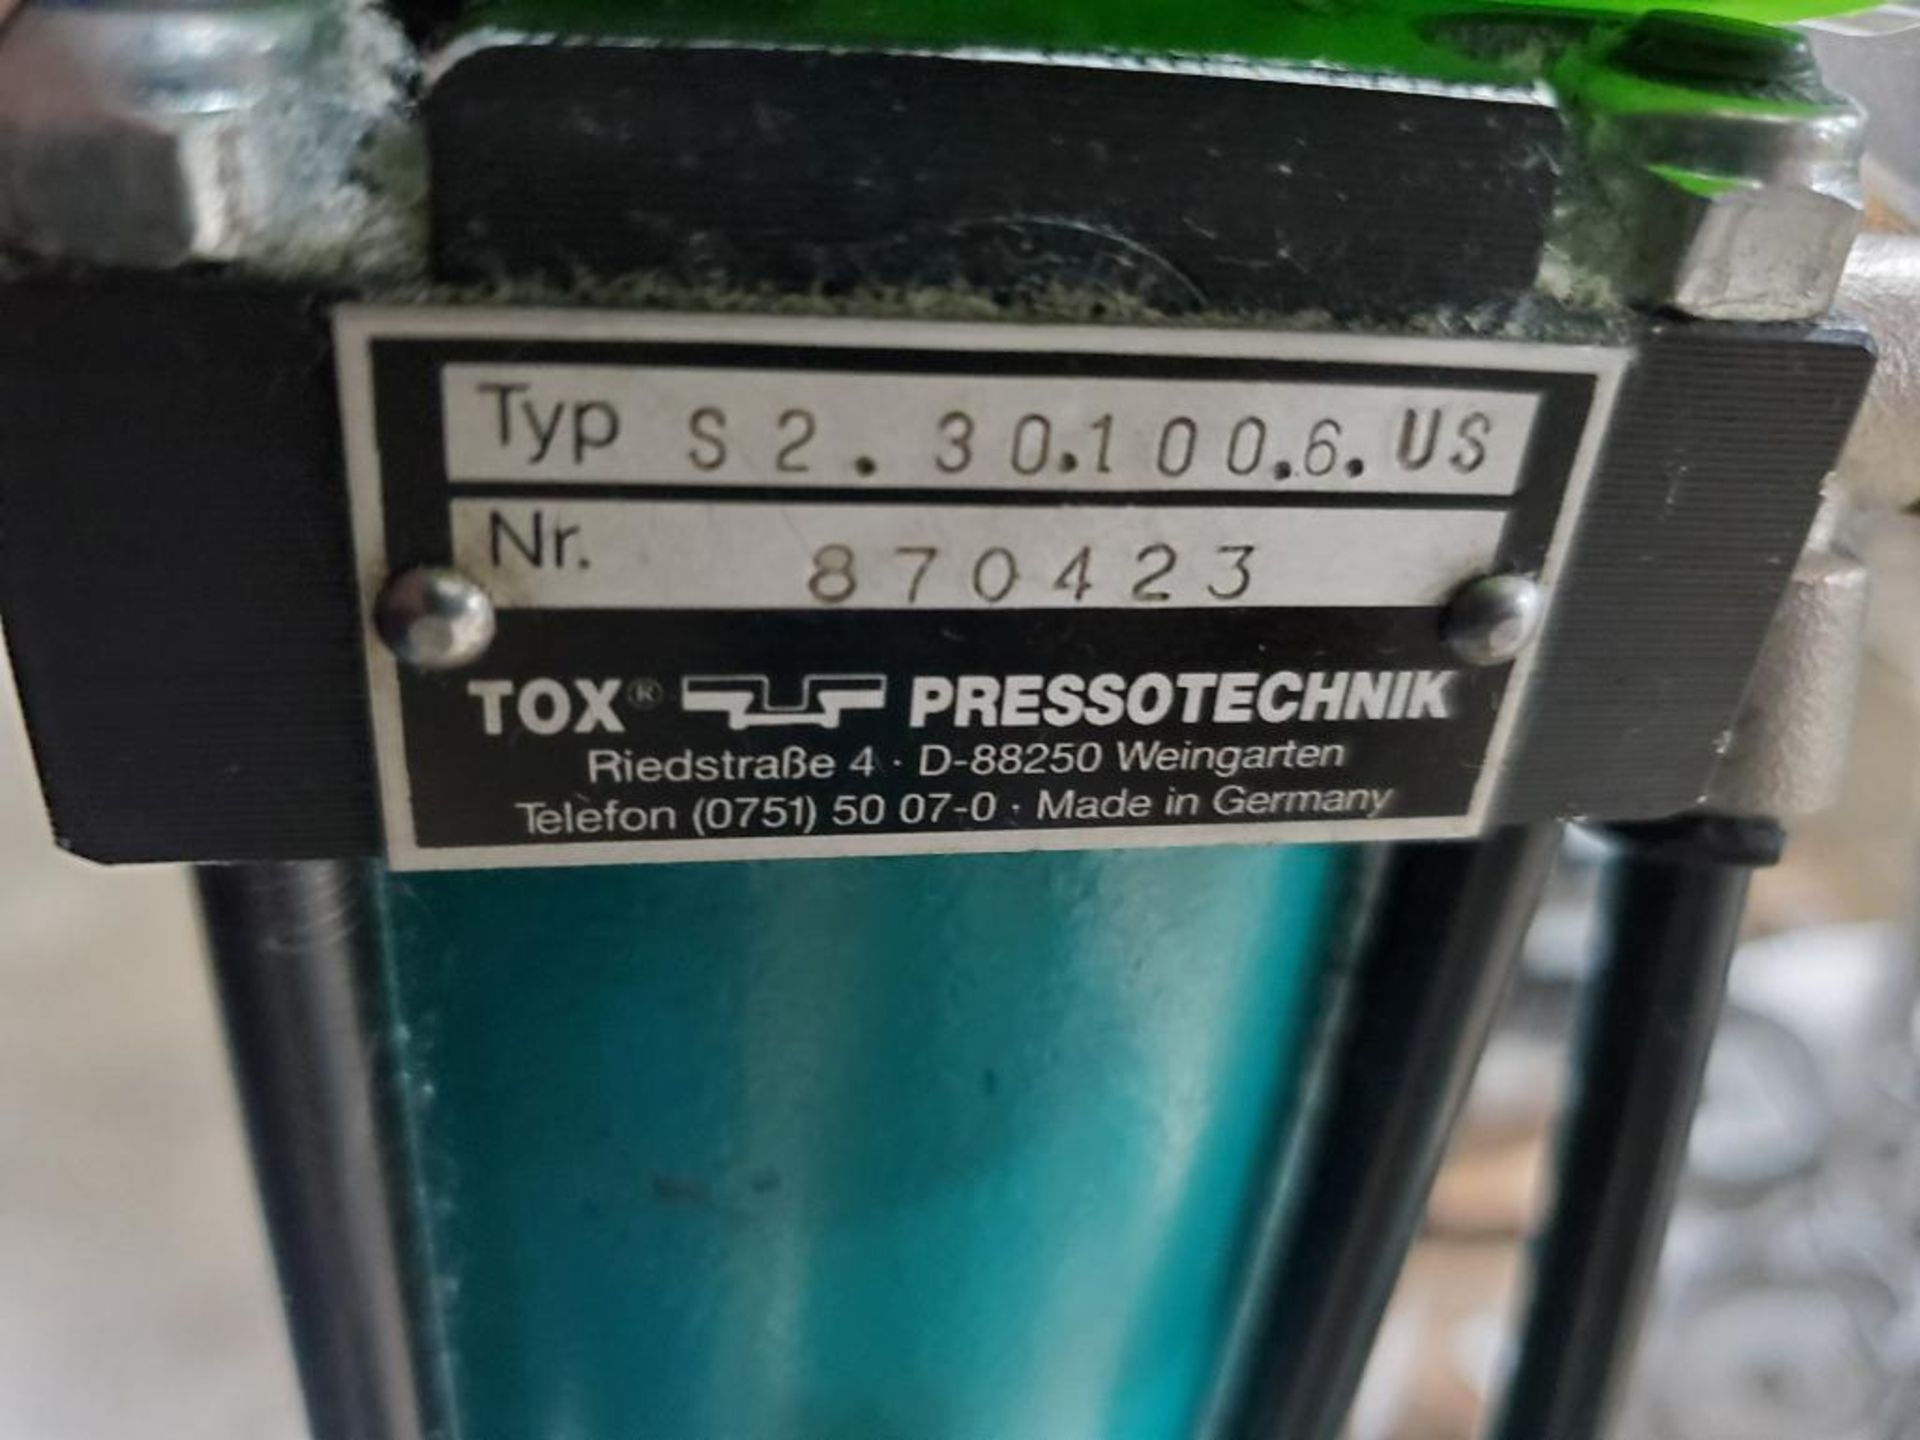 Tox Pressotechnik 2 ton press. Used for die cutting and pulled from a decommissioned machine. - Image 4 of 4